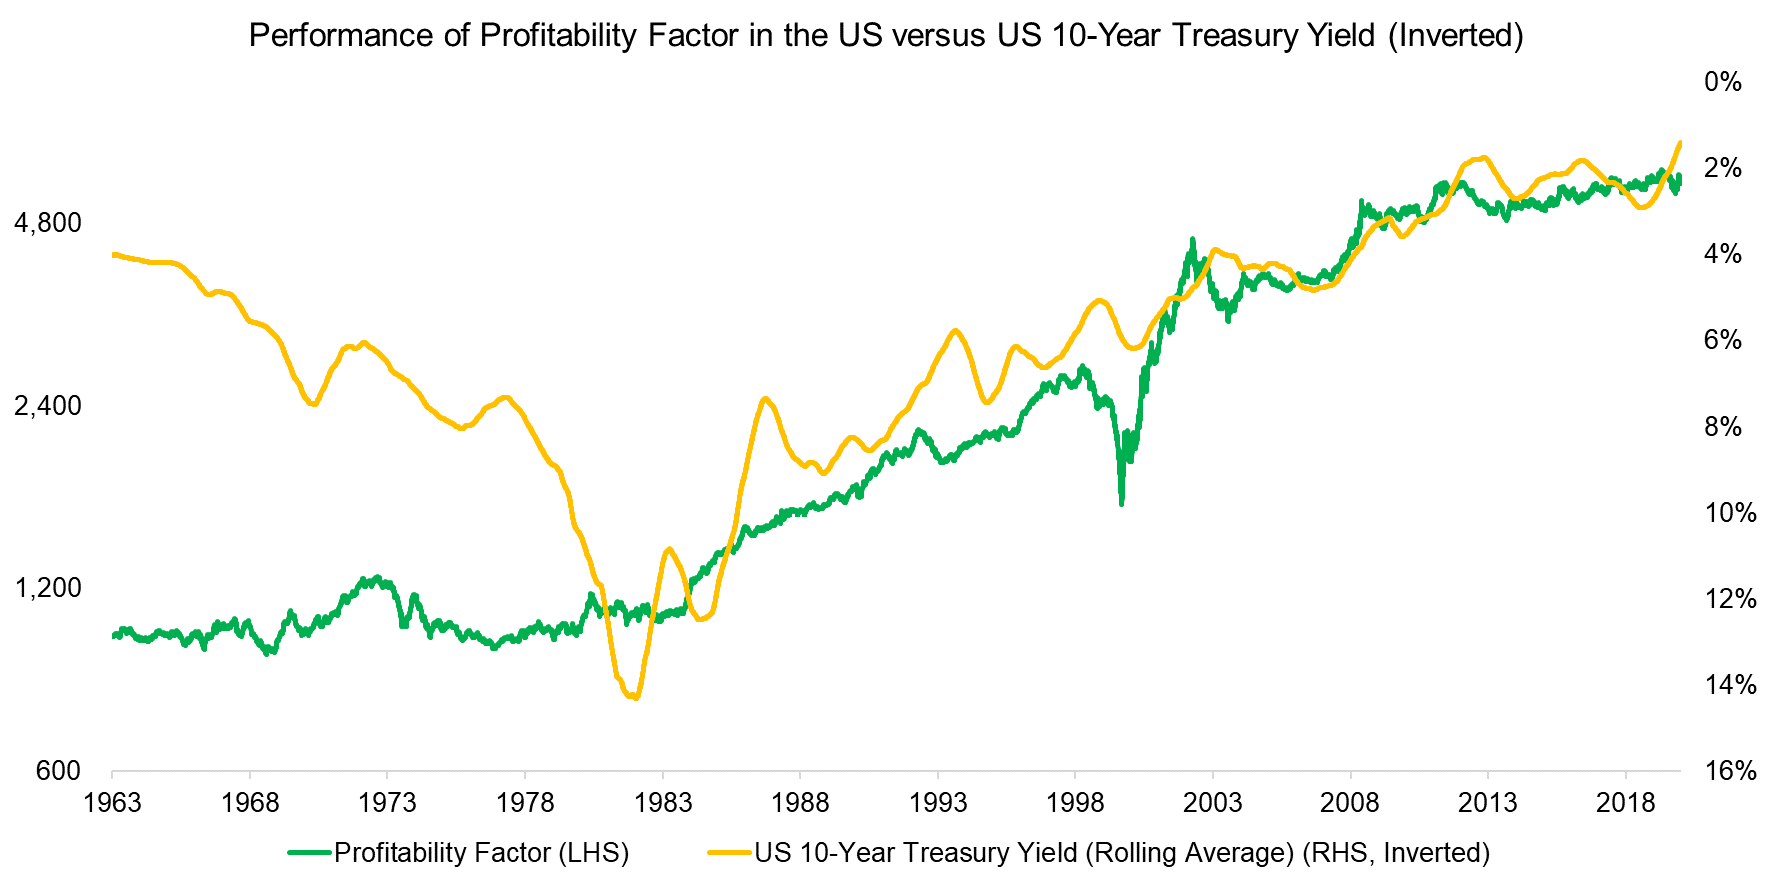 Performance of Profitability Factor in the US versus US 10-Year Treasury Yield (Inverted)